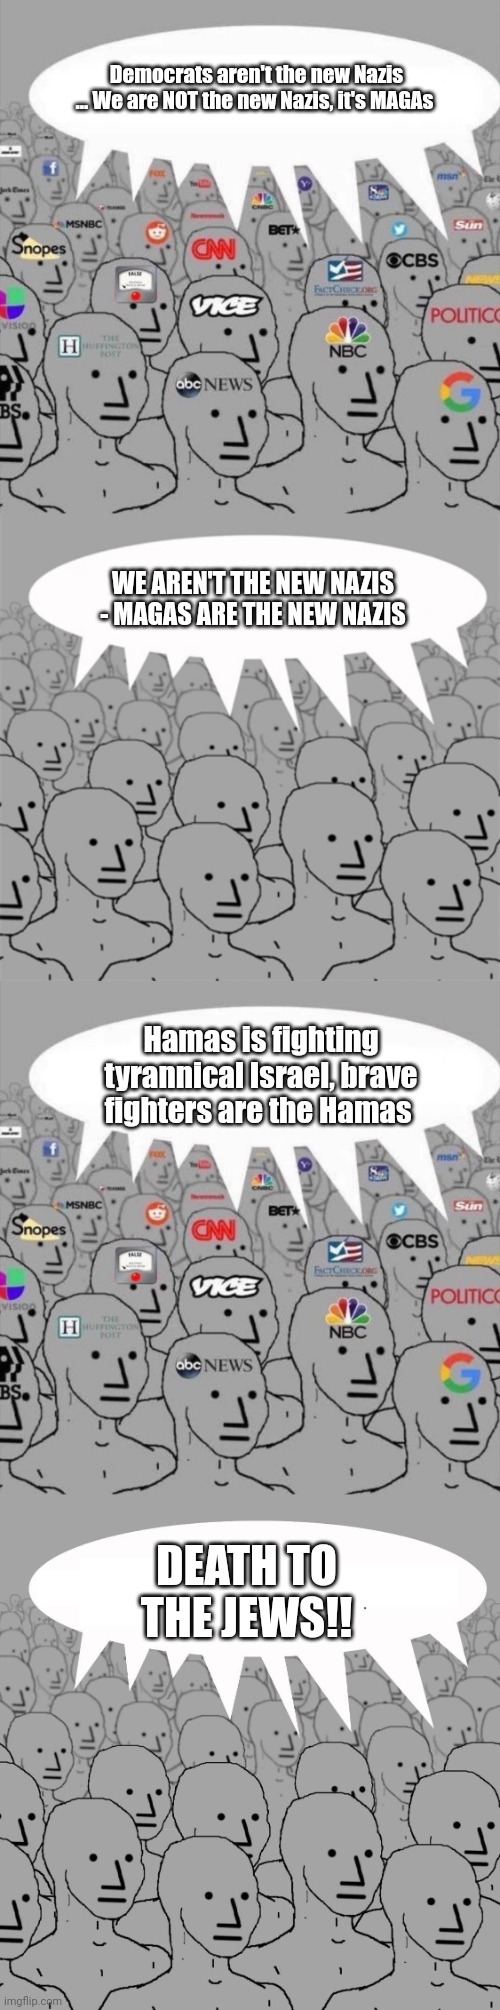 Democrats aren't the new Nazis ... We are NOT the new Nazis, it's MAGAs; WE AREN'T THE NEW NAZIS - MAGAS ARE THE NEW NAZIS; Hamas is fighting tyrannical Israel, brave fighters are the Hamas; DEATH TO THE JEWS!! | image tagged in npc media,npcprogramscreed,npc | made w/ Imgflip meme maker